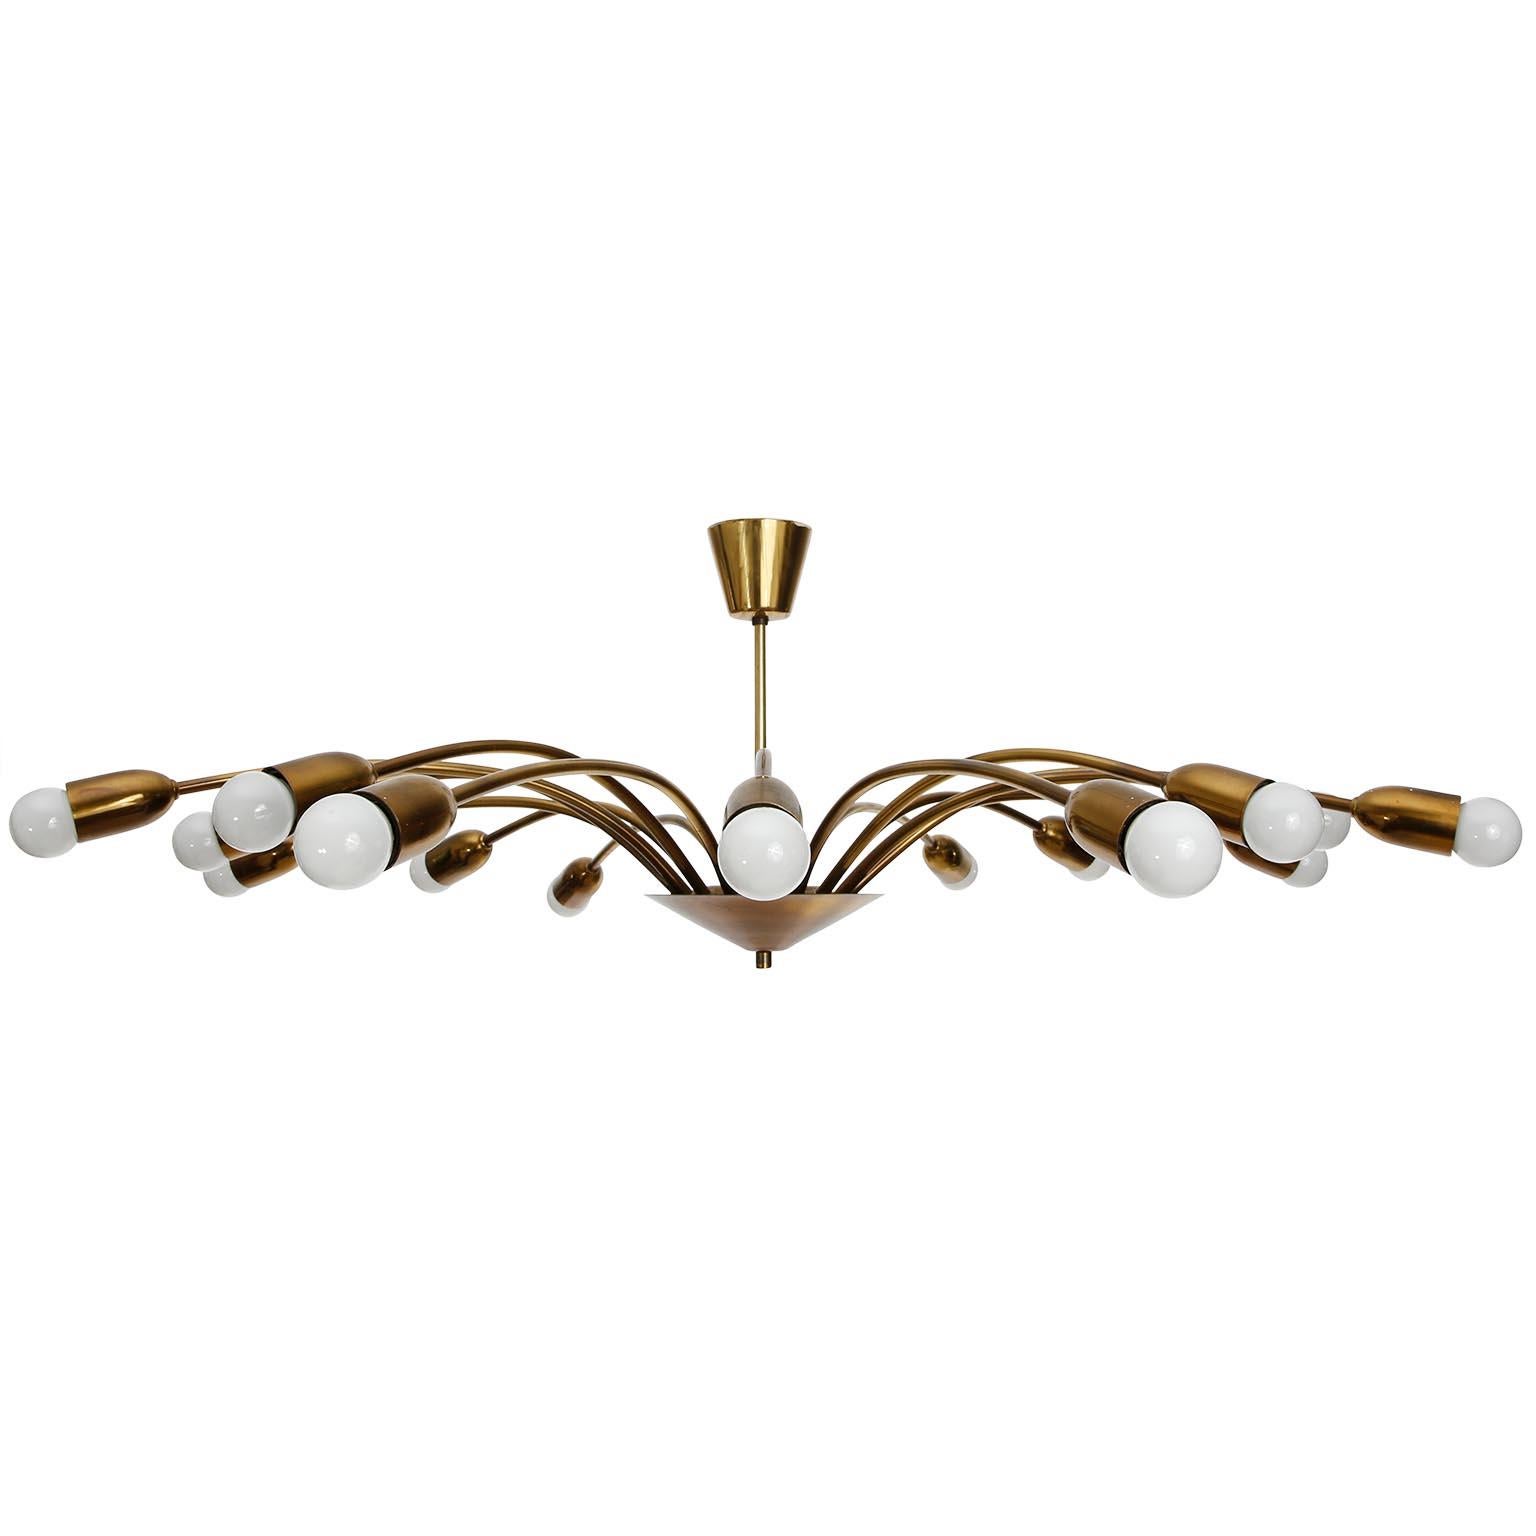 A large 16-arm brass spider light fixture manufactured in midcentury in 1960s.
The light is Italian or Austrian. Stilnovo or J.T. Kalmar made very similar lights. It is attributed to one of them.
This beautiful fixture is made of natural aged